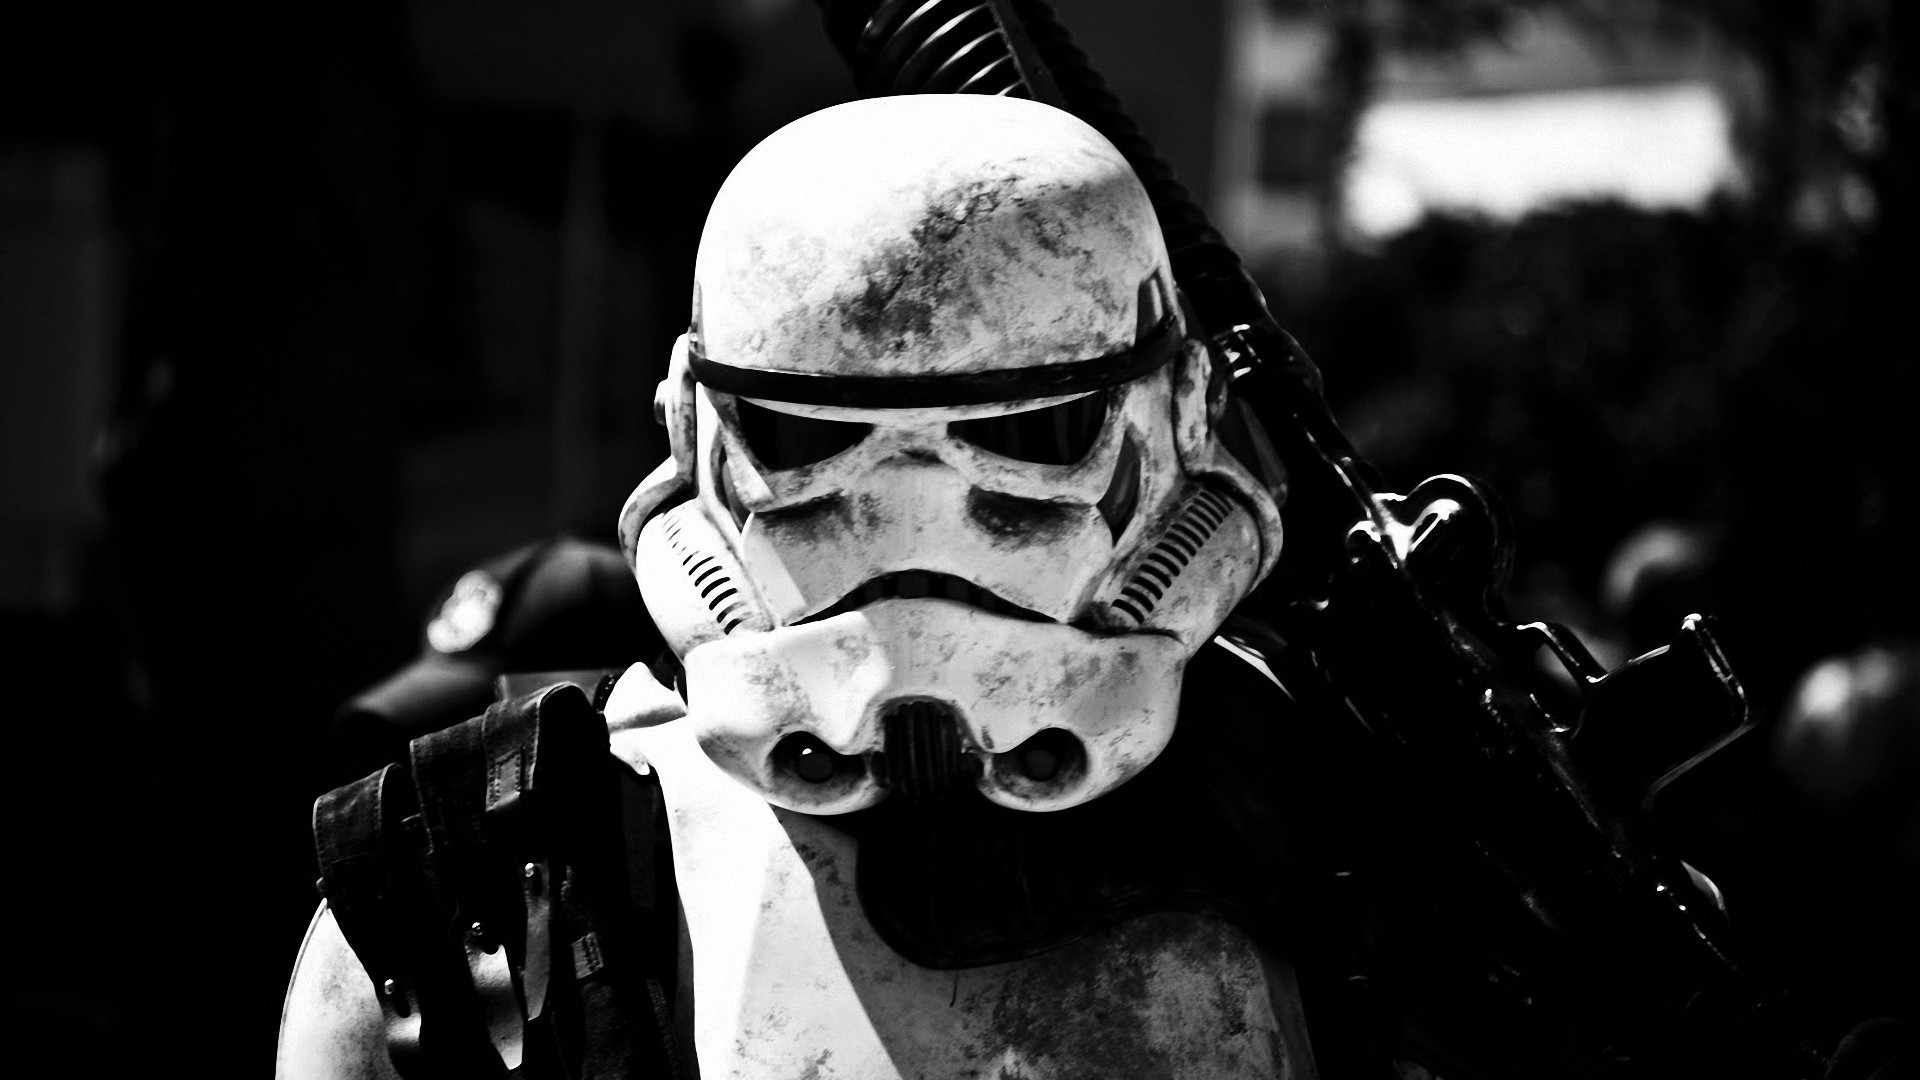 Imperial Stormtrooper shortly after the conclusion of exercise Emperors Fury 1362 x